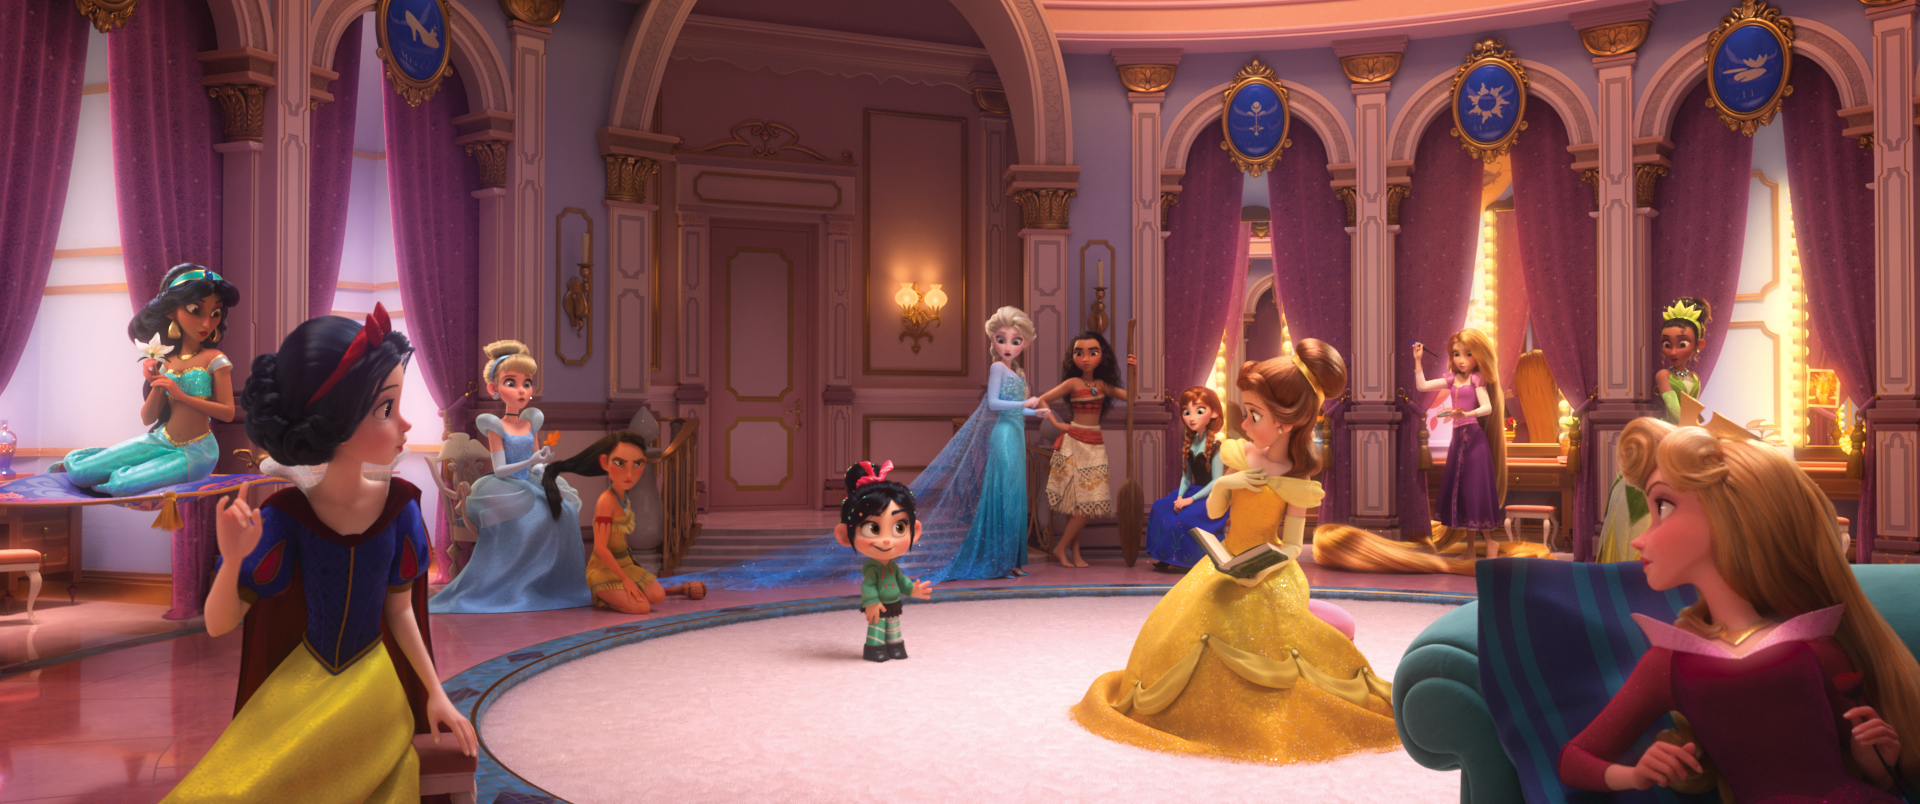 ROYAL REUNION – In “Ralph Breaks the Internet: Wreck It Ralph 2,” Vanellope von Schweetz—along with her best friend Ralph—ventures into the uncharted world of the internet. When she finds herself surrounded by Disney princesses, she’s surprised to learn that she actually has a lot in common with them. The scene, highlighted in a new trailer for the film, features several of the original princess voices, including Auli‘i Cravalho (“Moana”), Kristen Bell (Anna in “Frozen”), Idina Menzel (Elsa in “Frozen”), Kelly MacDonald (Merida in “Brave”), Mandy Moore (Rapunzel in “Tangled”), Anika Noni Rose (Tiana in “The Princess and the Frog”), Ming-Na Wen (“Mulan”), Irene Bedard (“Pocahontas”), Linda Larkin (Jasmine in “Aladdin”), Paige O’Hara (Belle in “Beauty and the Beast”) and Jodi Benson (Ariel in “The Little Mermaid”). Featuring Sarah Silverman as the voice of Vanellope, “Ralph Breaks the Internet: Wreck It Ralph 2” opens in theaters nationwide Nov. 21, 2018. ©2018 Disney. All Rights Reserved.